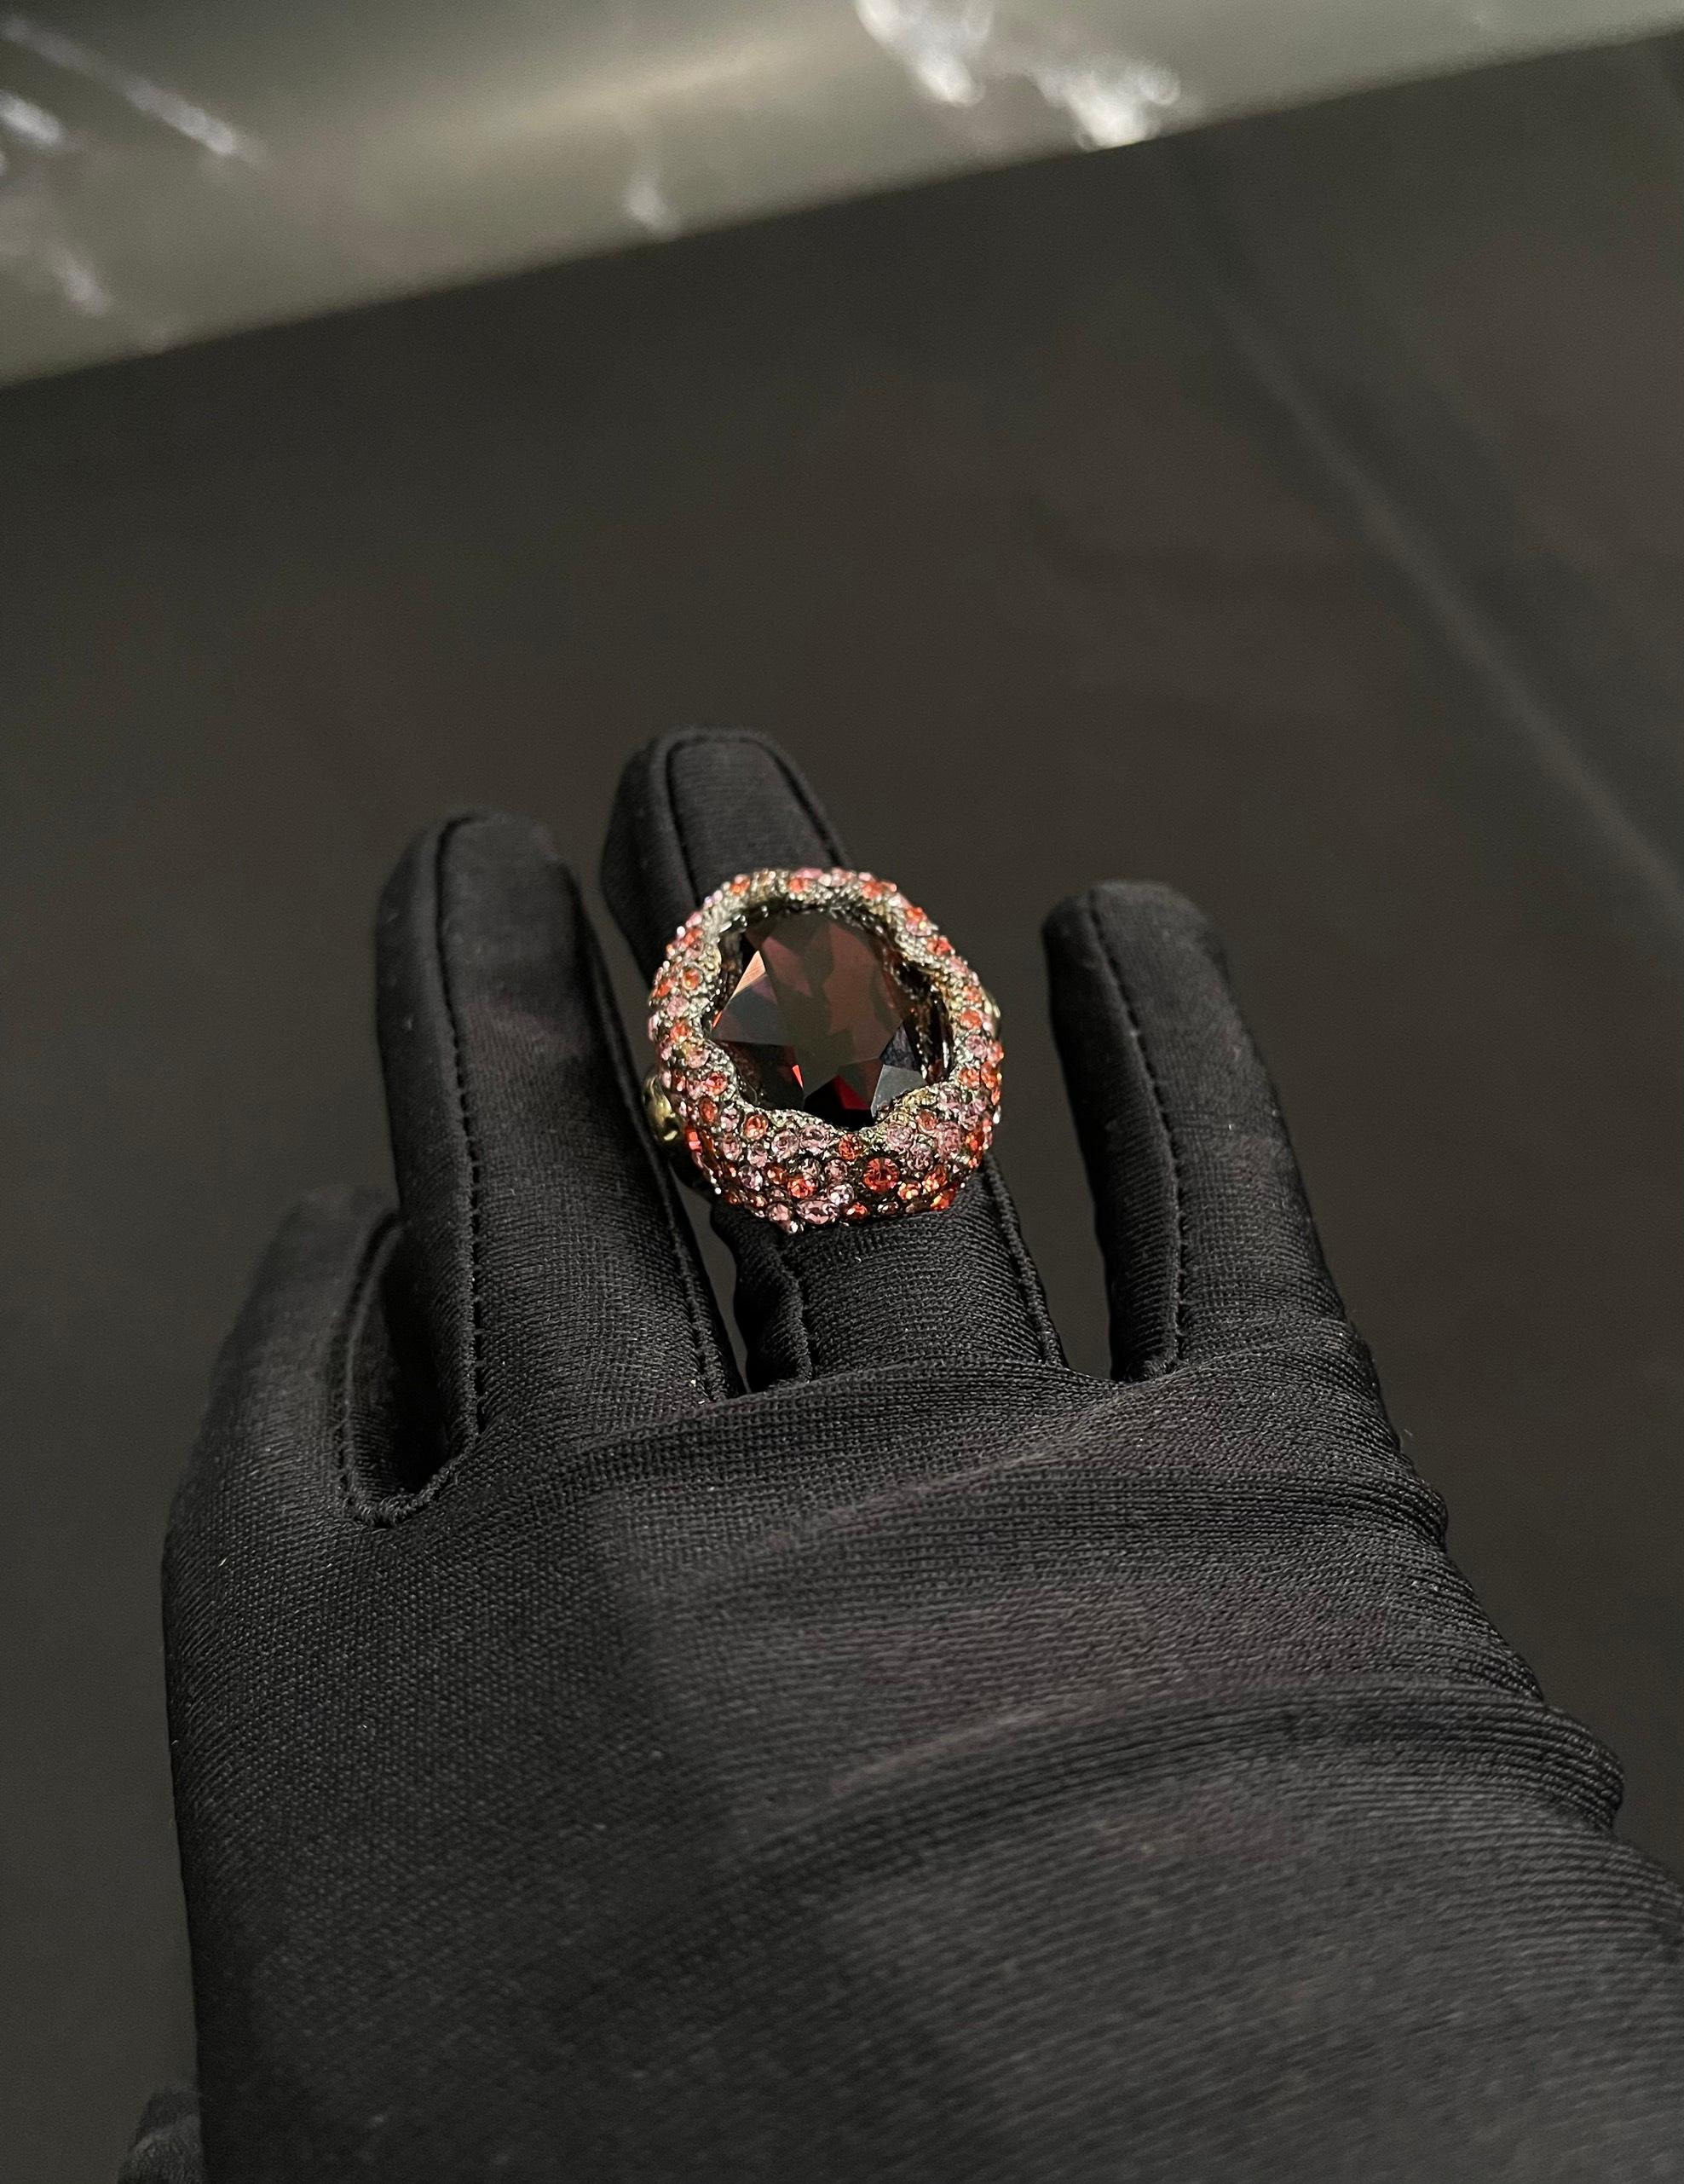 Roberto Cavalli Gemstones Embellished Ring In New Condition For Sale In Seattle, WA